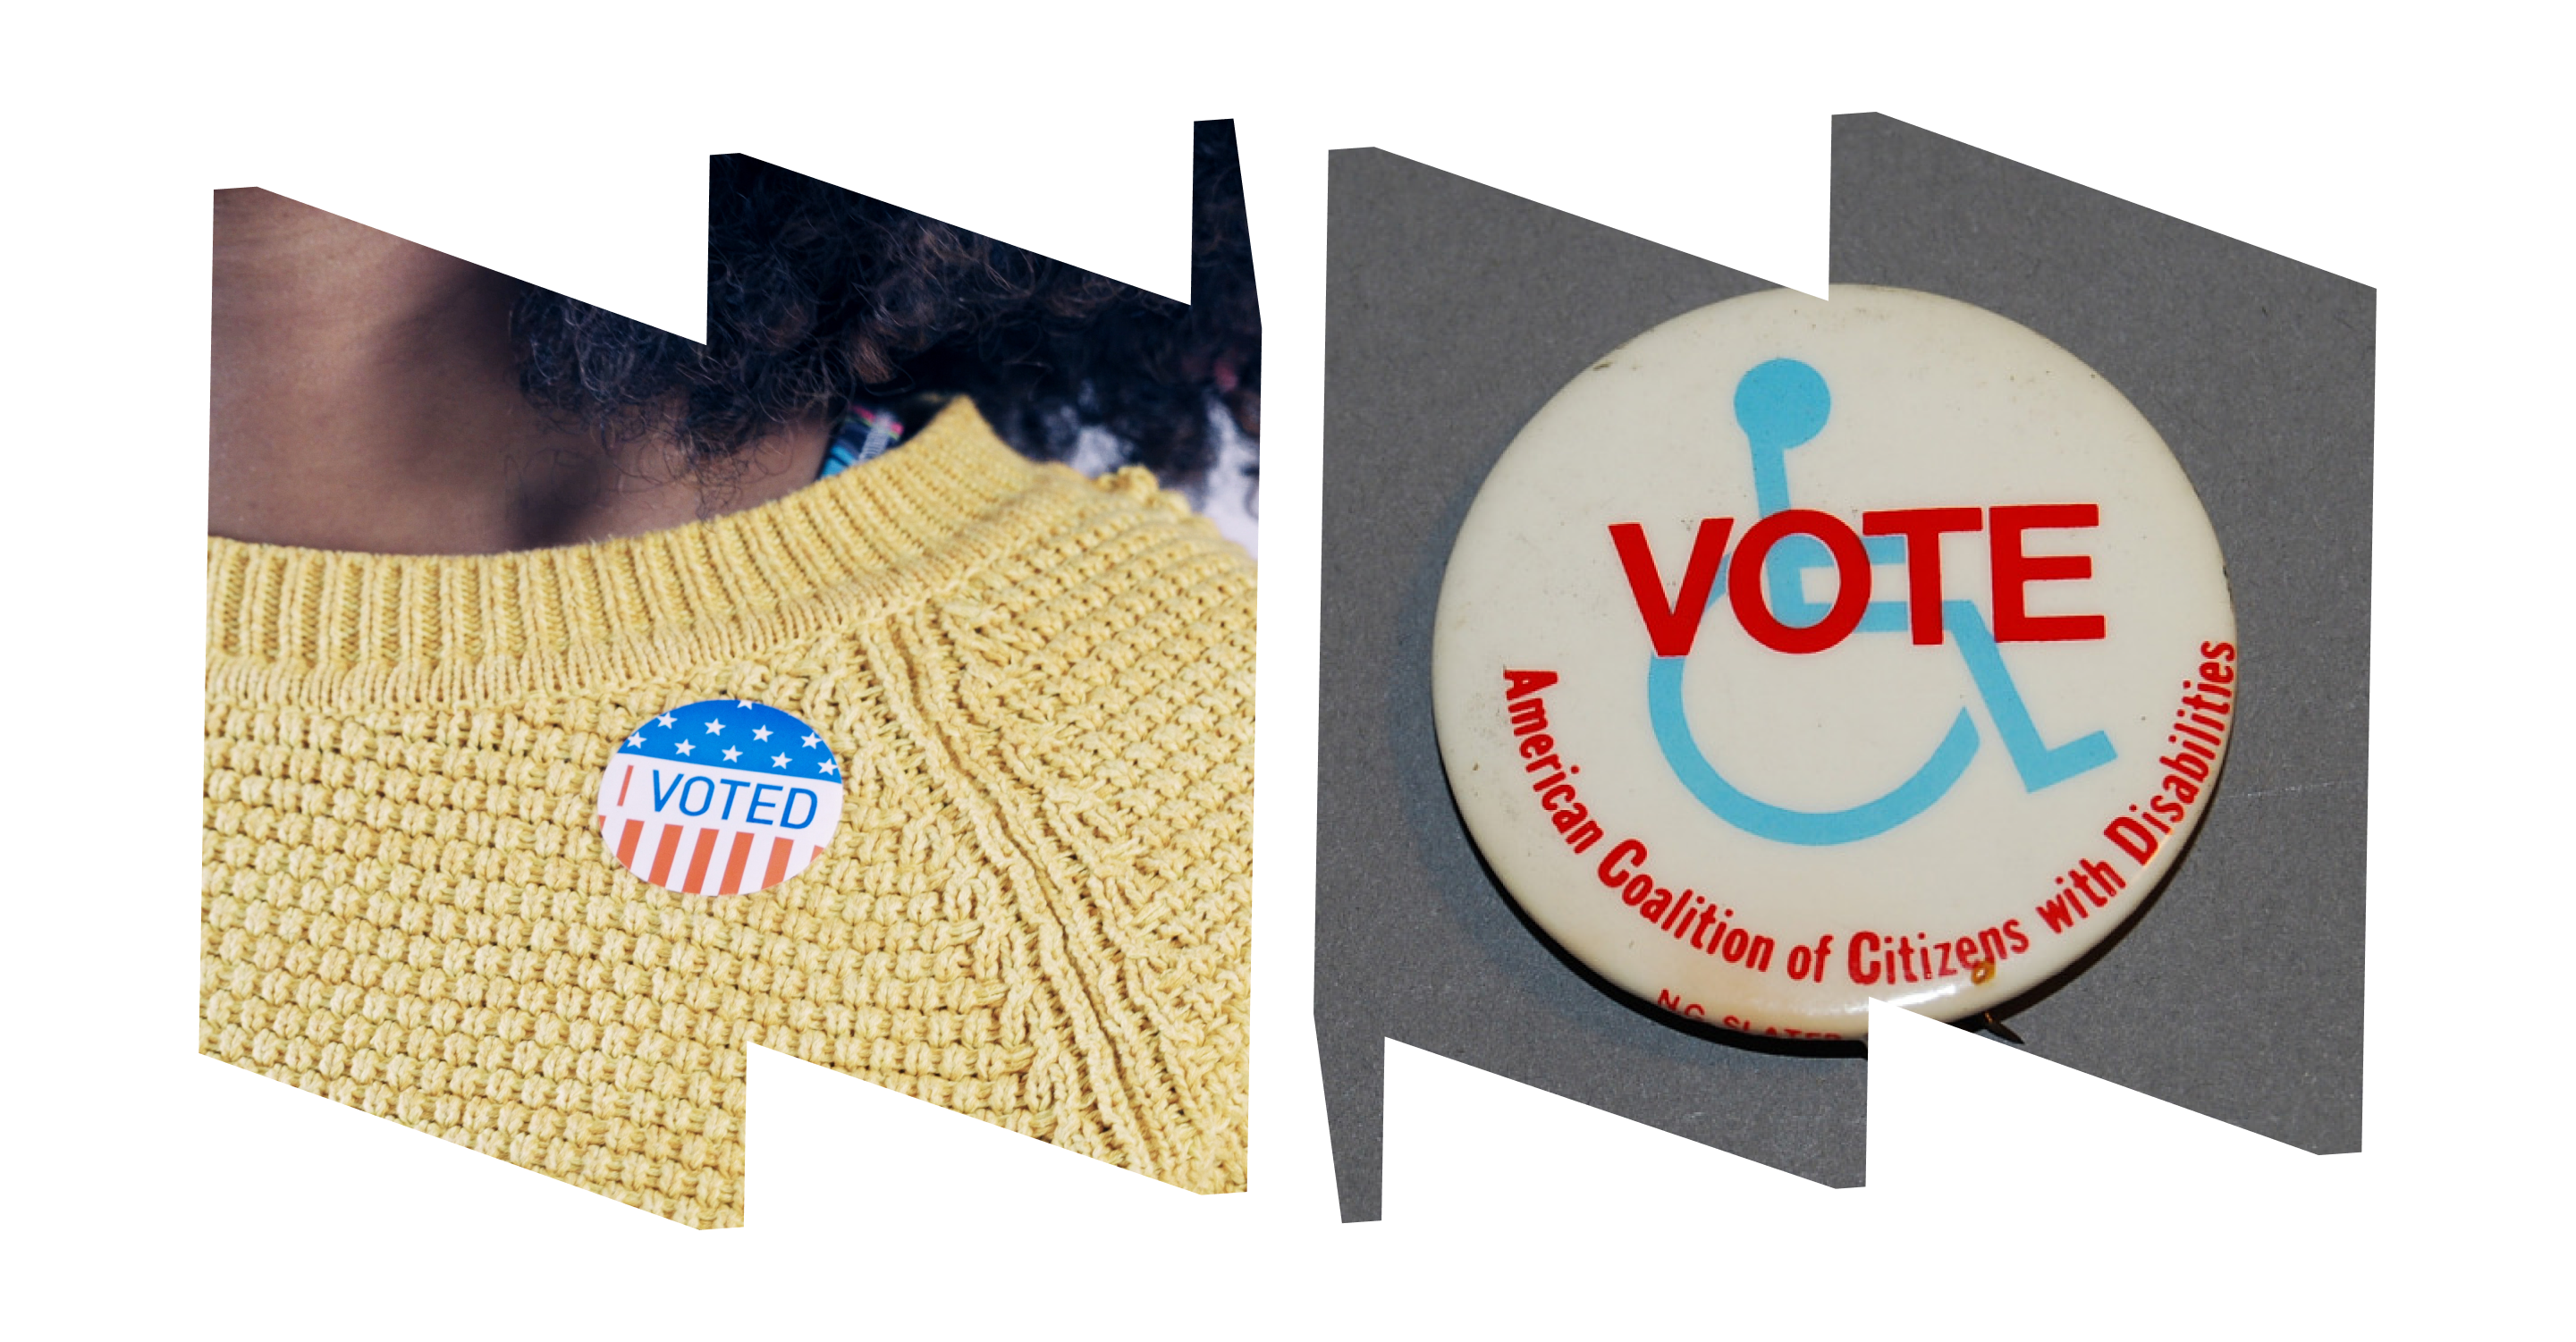 In left "W" frame, image of African American woman's neck and yellow shirt with sticker that says "I Voted"; in right "W" frame, pin-backed button that says "Vote" over graphic of person in wheelchair. Bottom text says "American Coalition of Citizens with Disabilities."